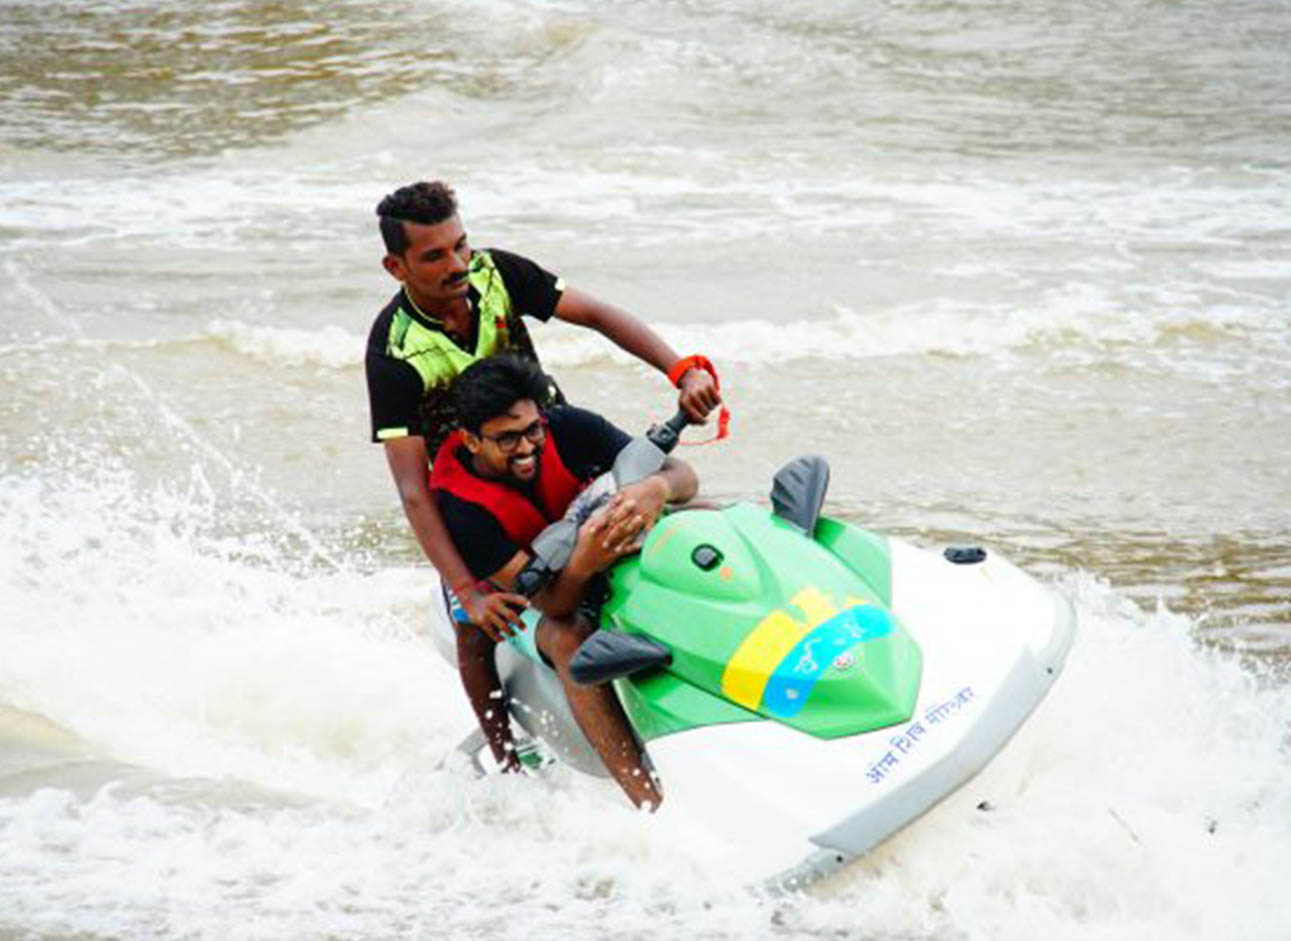 Jet Ski - Feel the adrenaline rush with exhilarating jet ski rides on the water